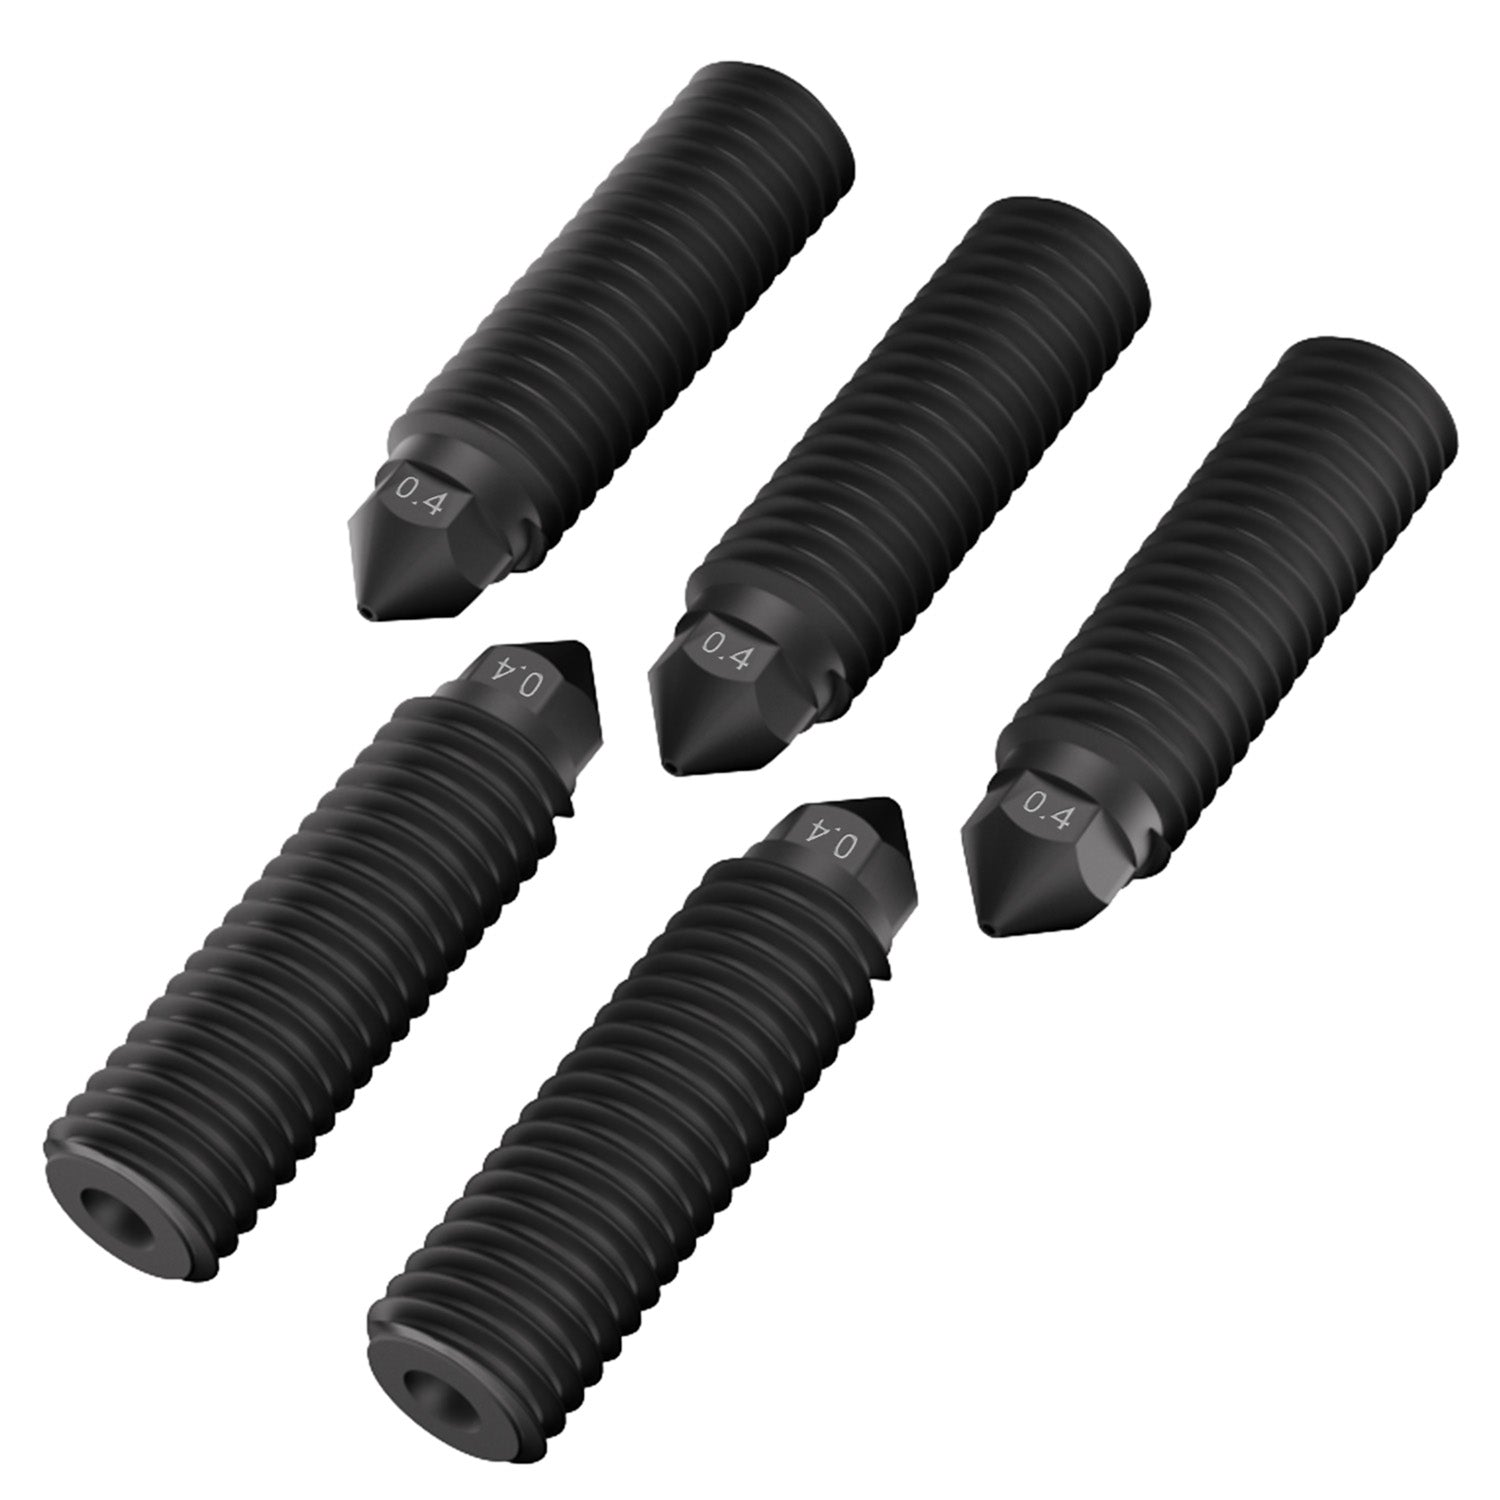 Hardened Steel Nozzle Kit 0.4mm For SW-X4/ SW-X3/ SW-X2